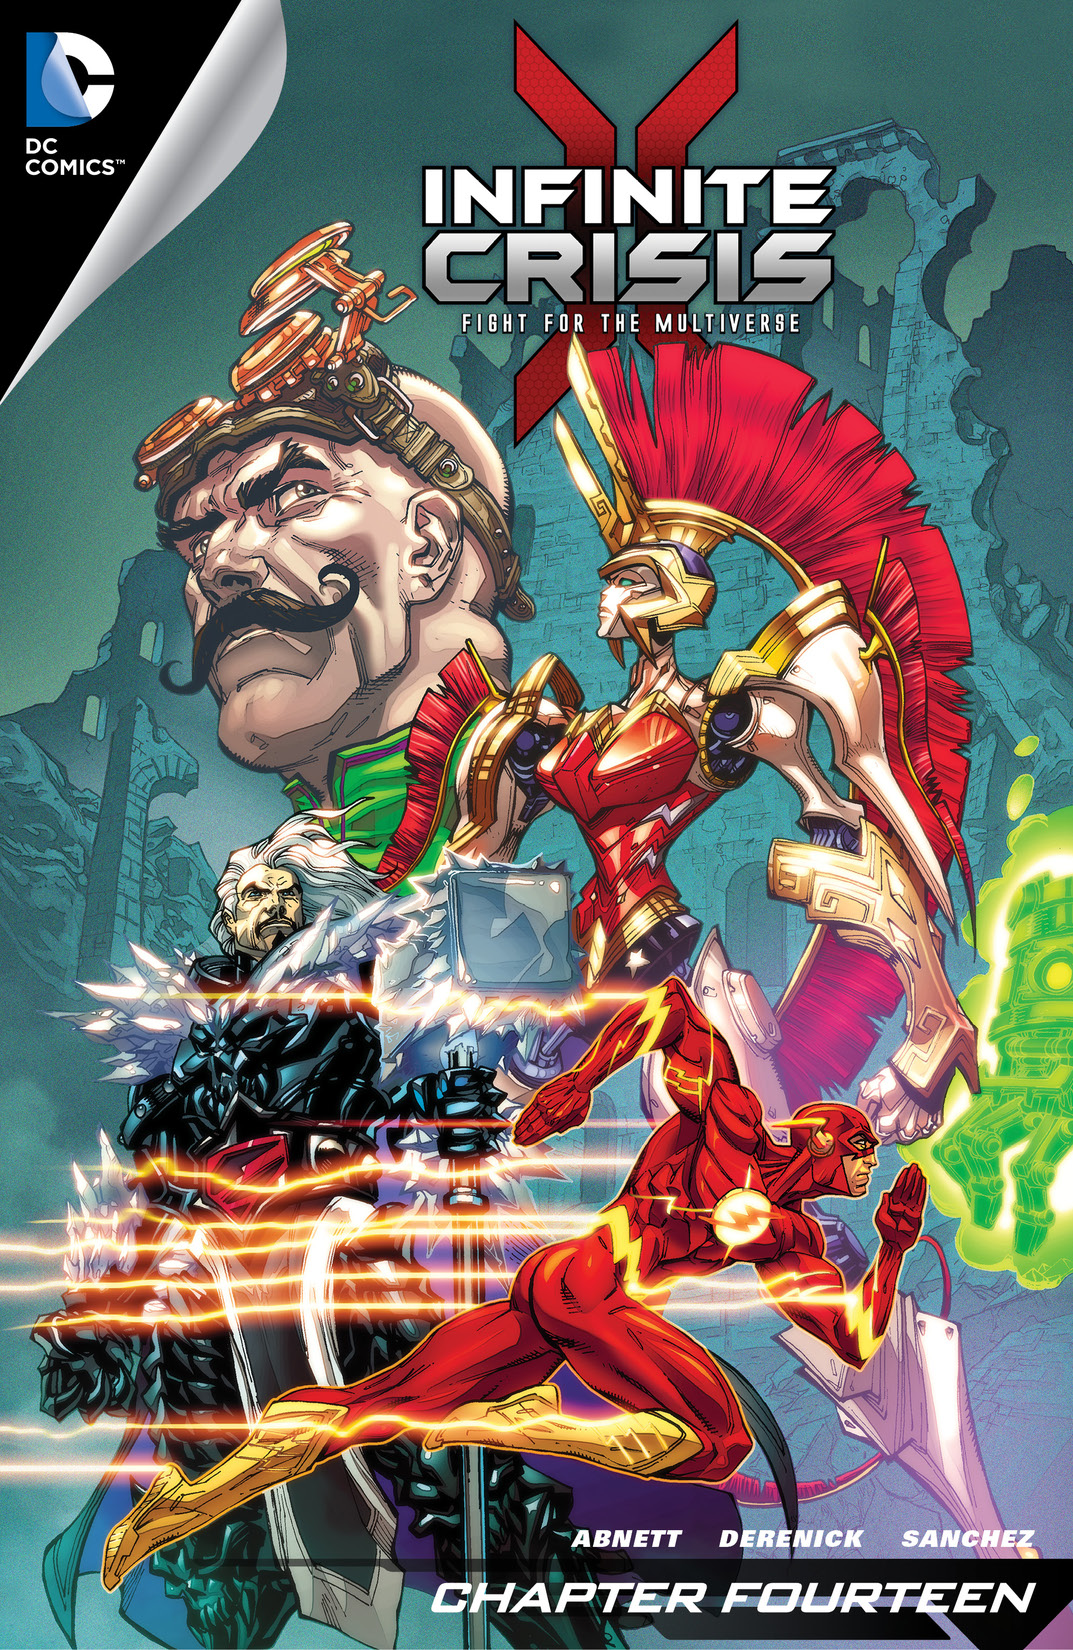 Infinite Crisis: Fight for the Multiverse #14 preview images